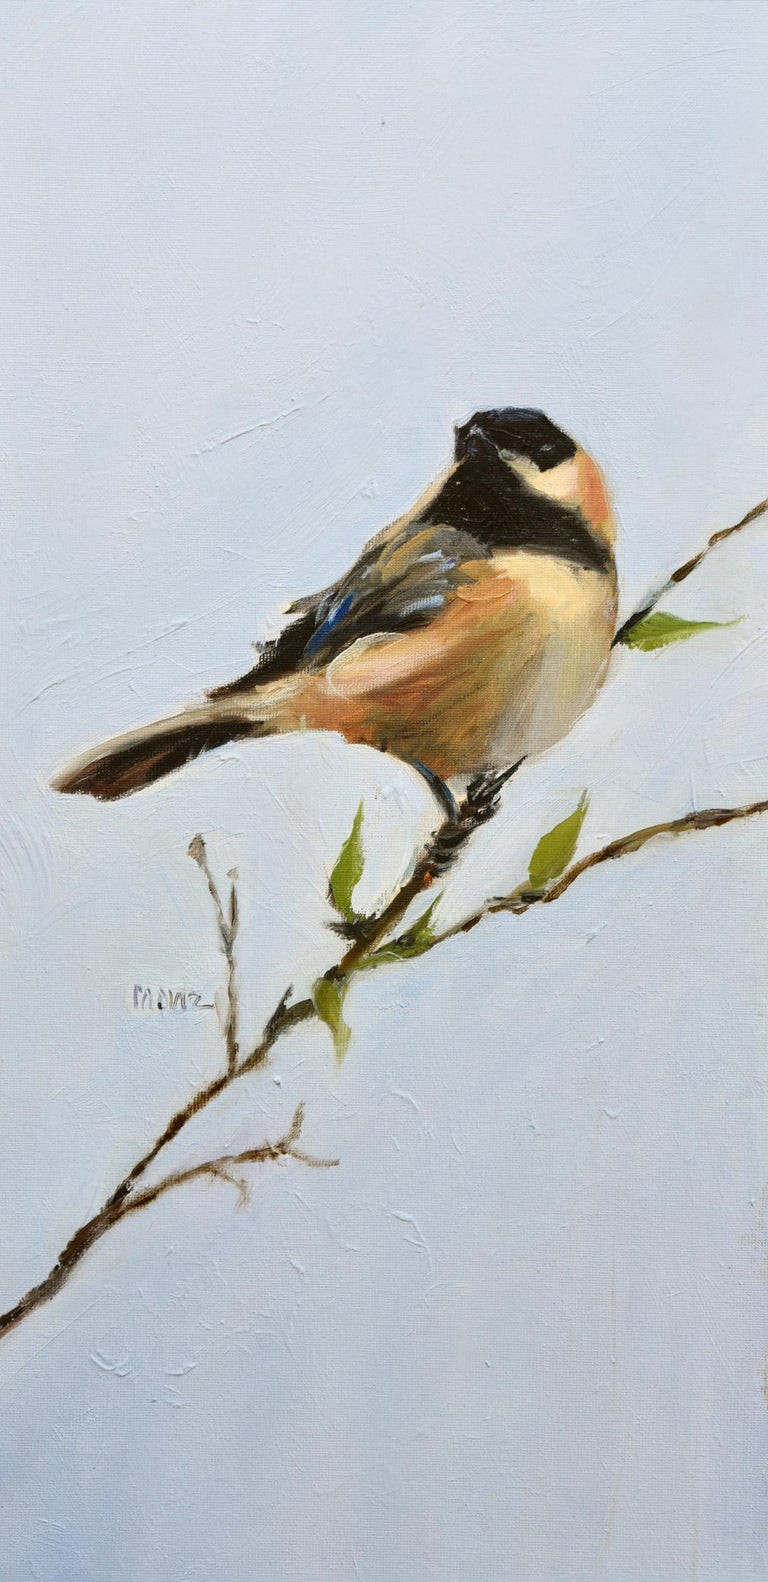 A Dream to Soar, Oil/ Linen, Oil Painters of America, Impressionism, Free Ship. - Painting by Judy Crowe